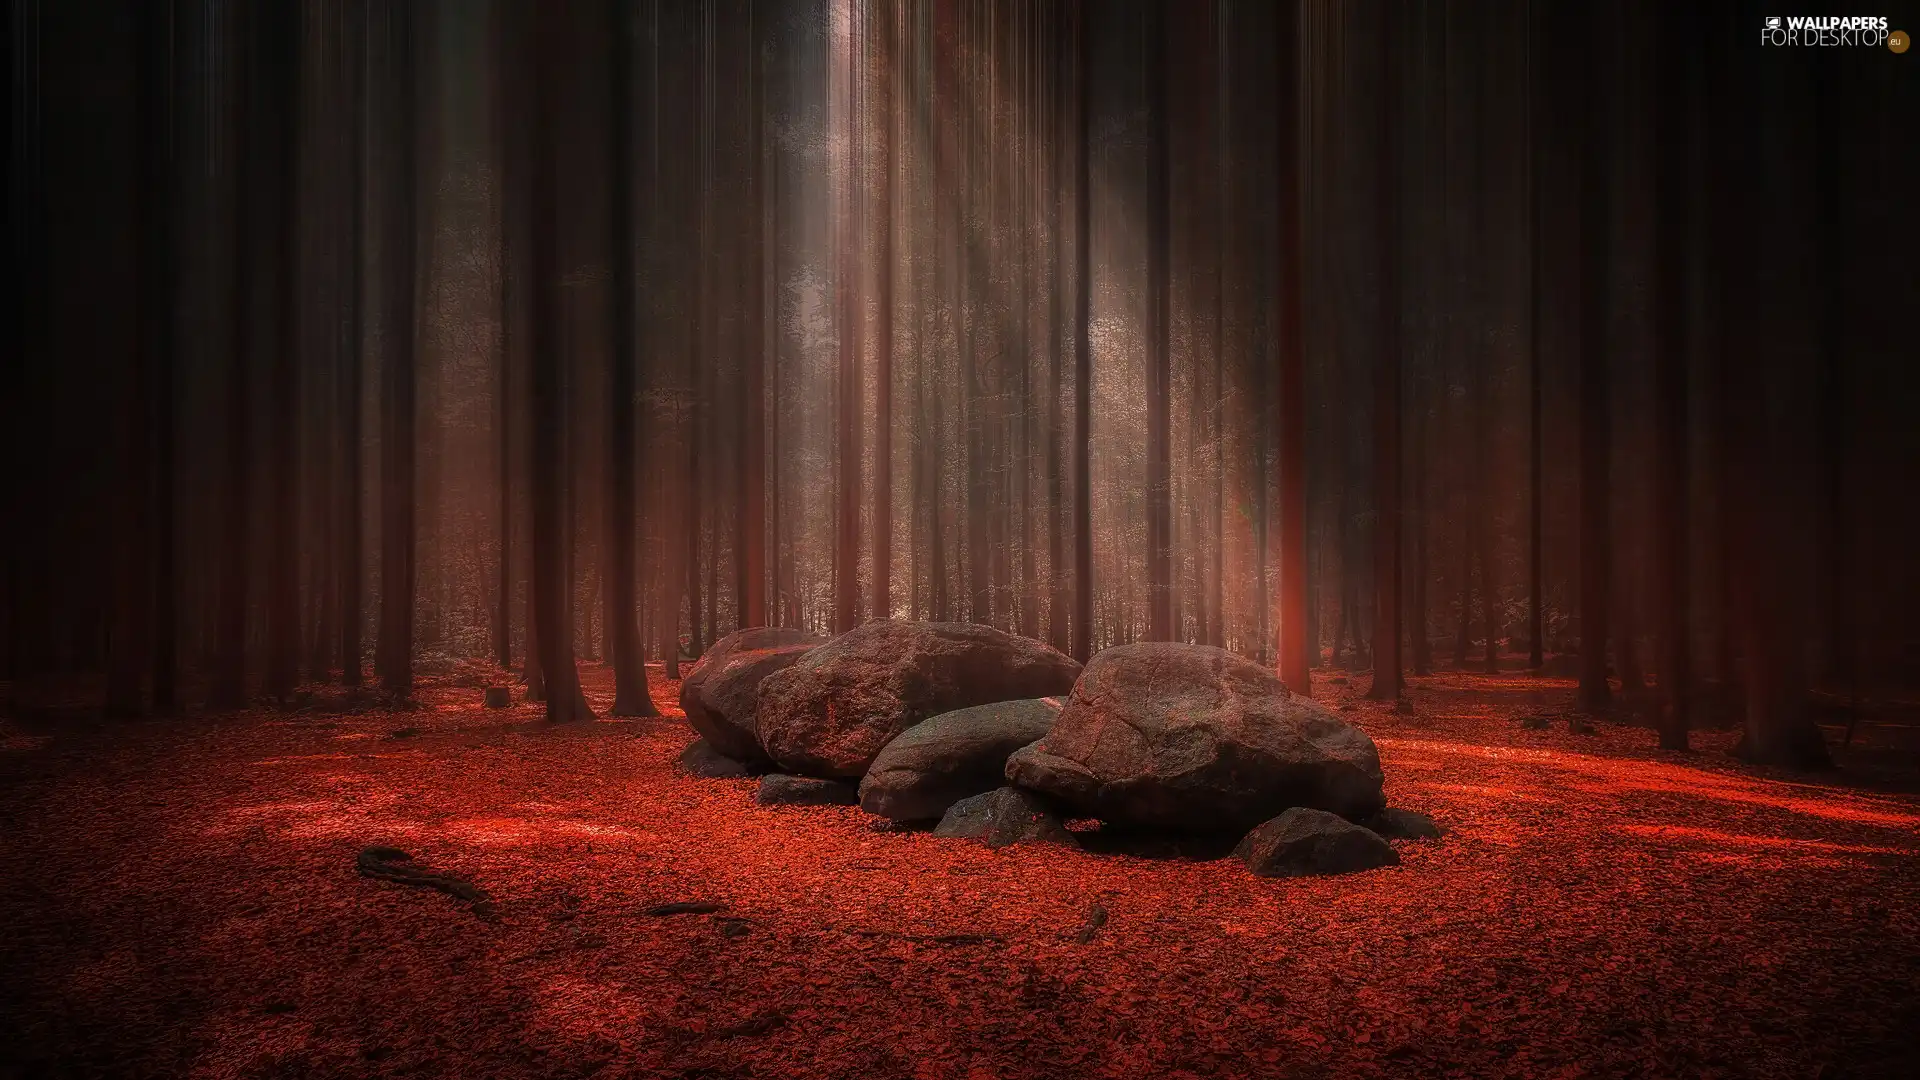 Leaf, light breaking through sky, Stones, Red, forest